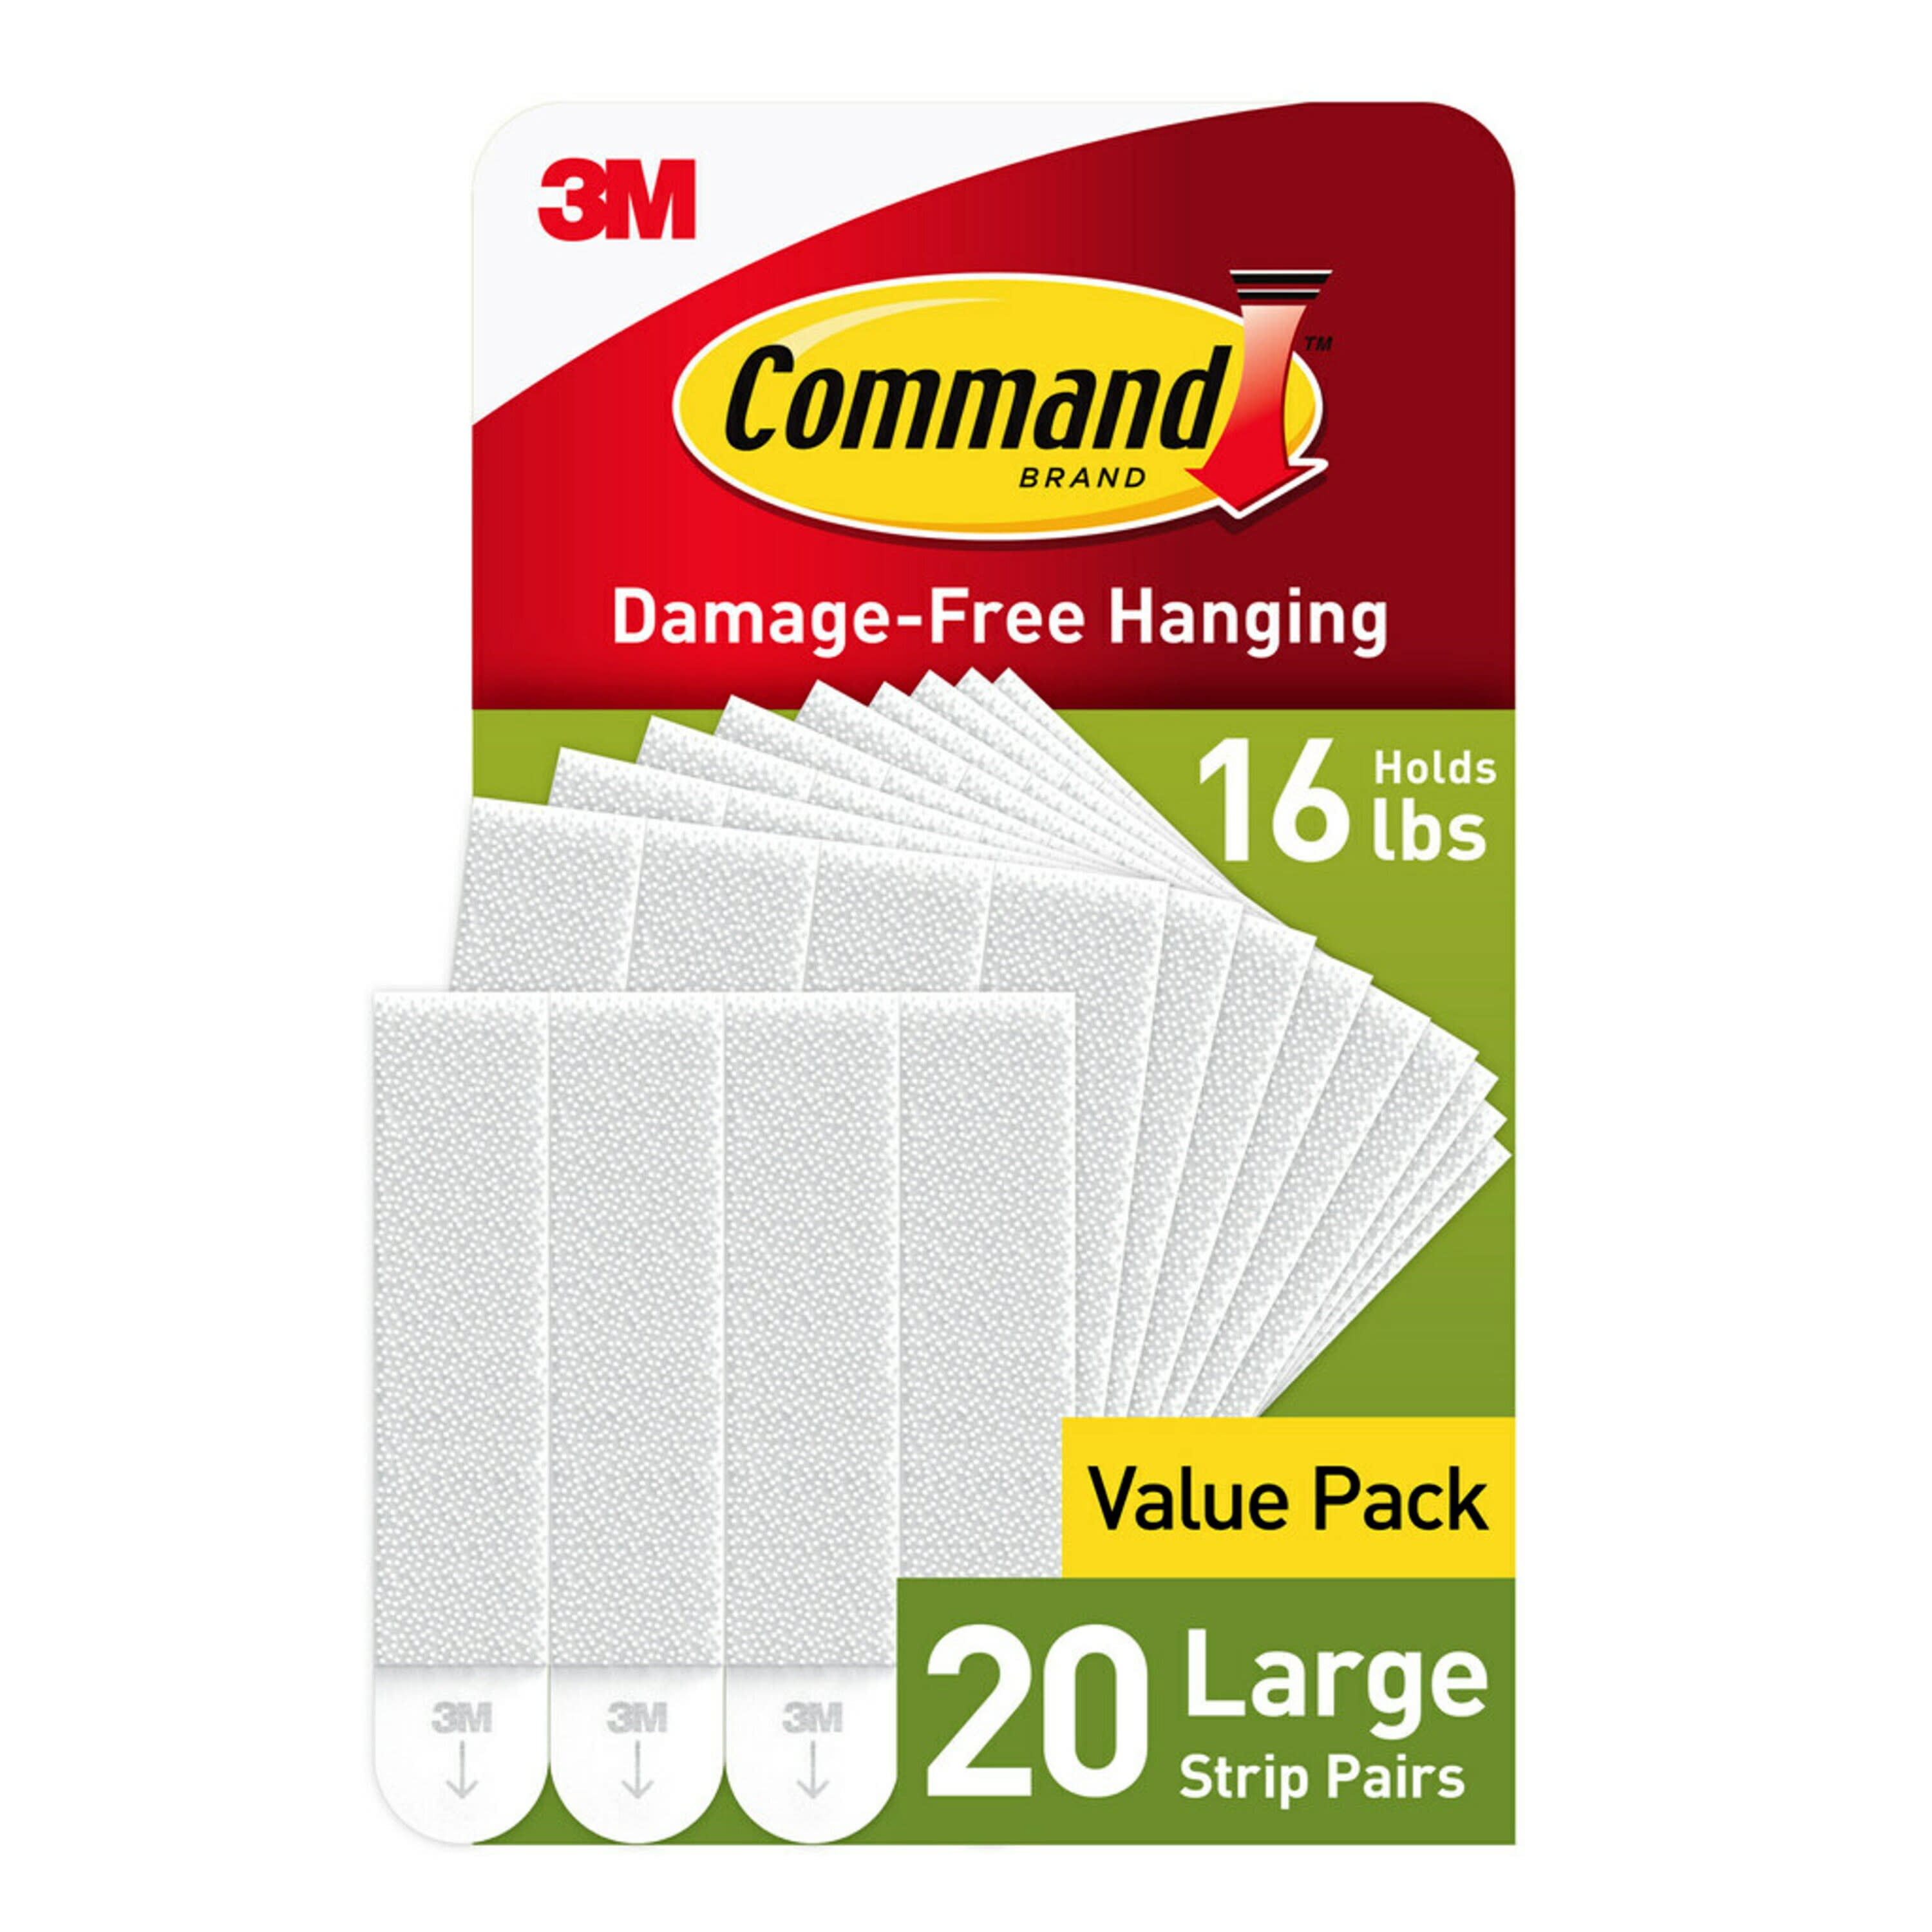 Command 9-Count Picture Hanging Strips - 17201-ES